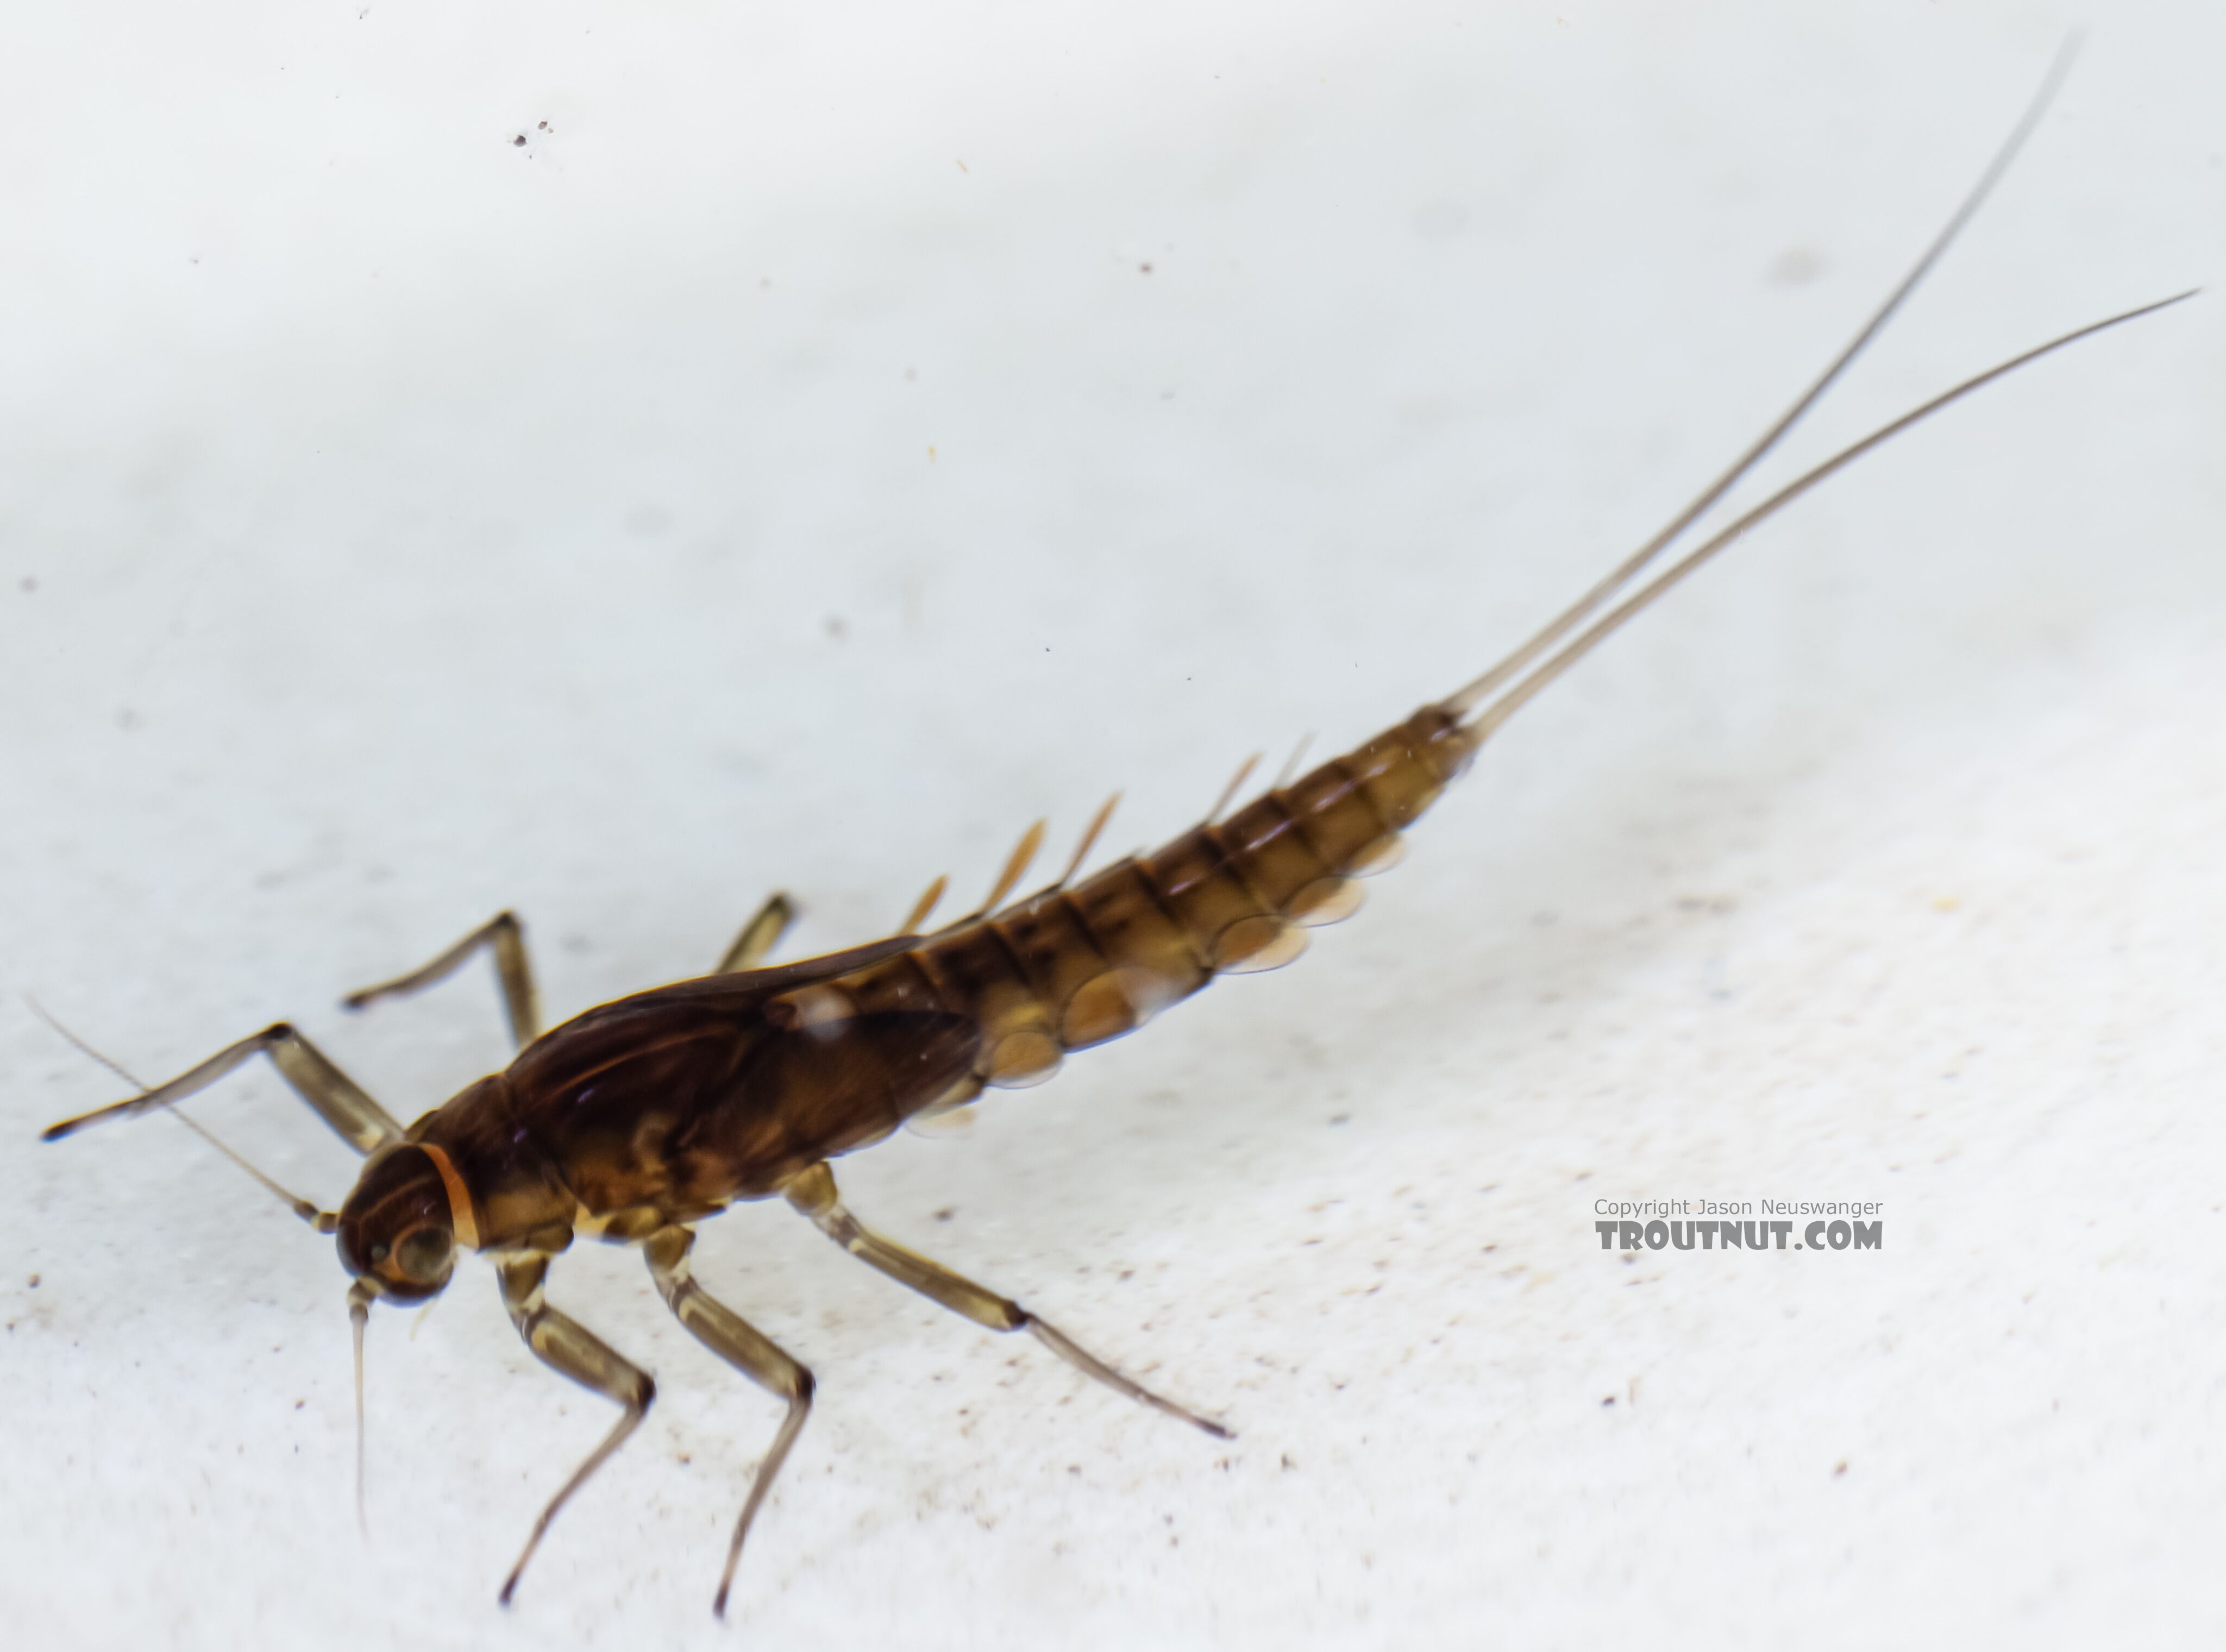 The J-shaped light mark on the first femur and L-shaped marks on the next two are telltale signs of Baetis bicaudatus according to the original species description.  Baetis bicaudatus (BWO) Mayfly Nymph from Green Lake Outlet in Idaho